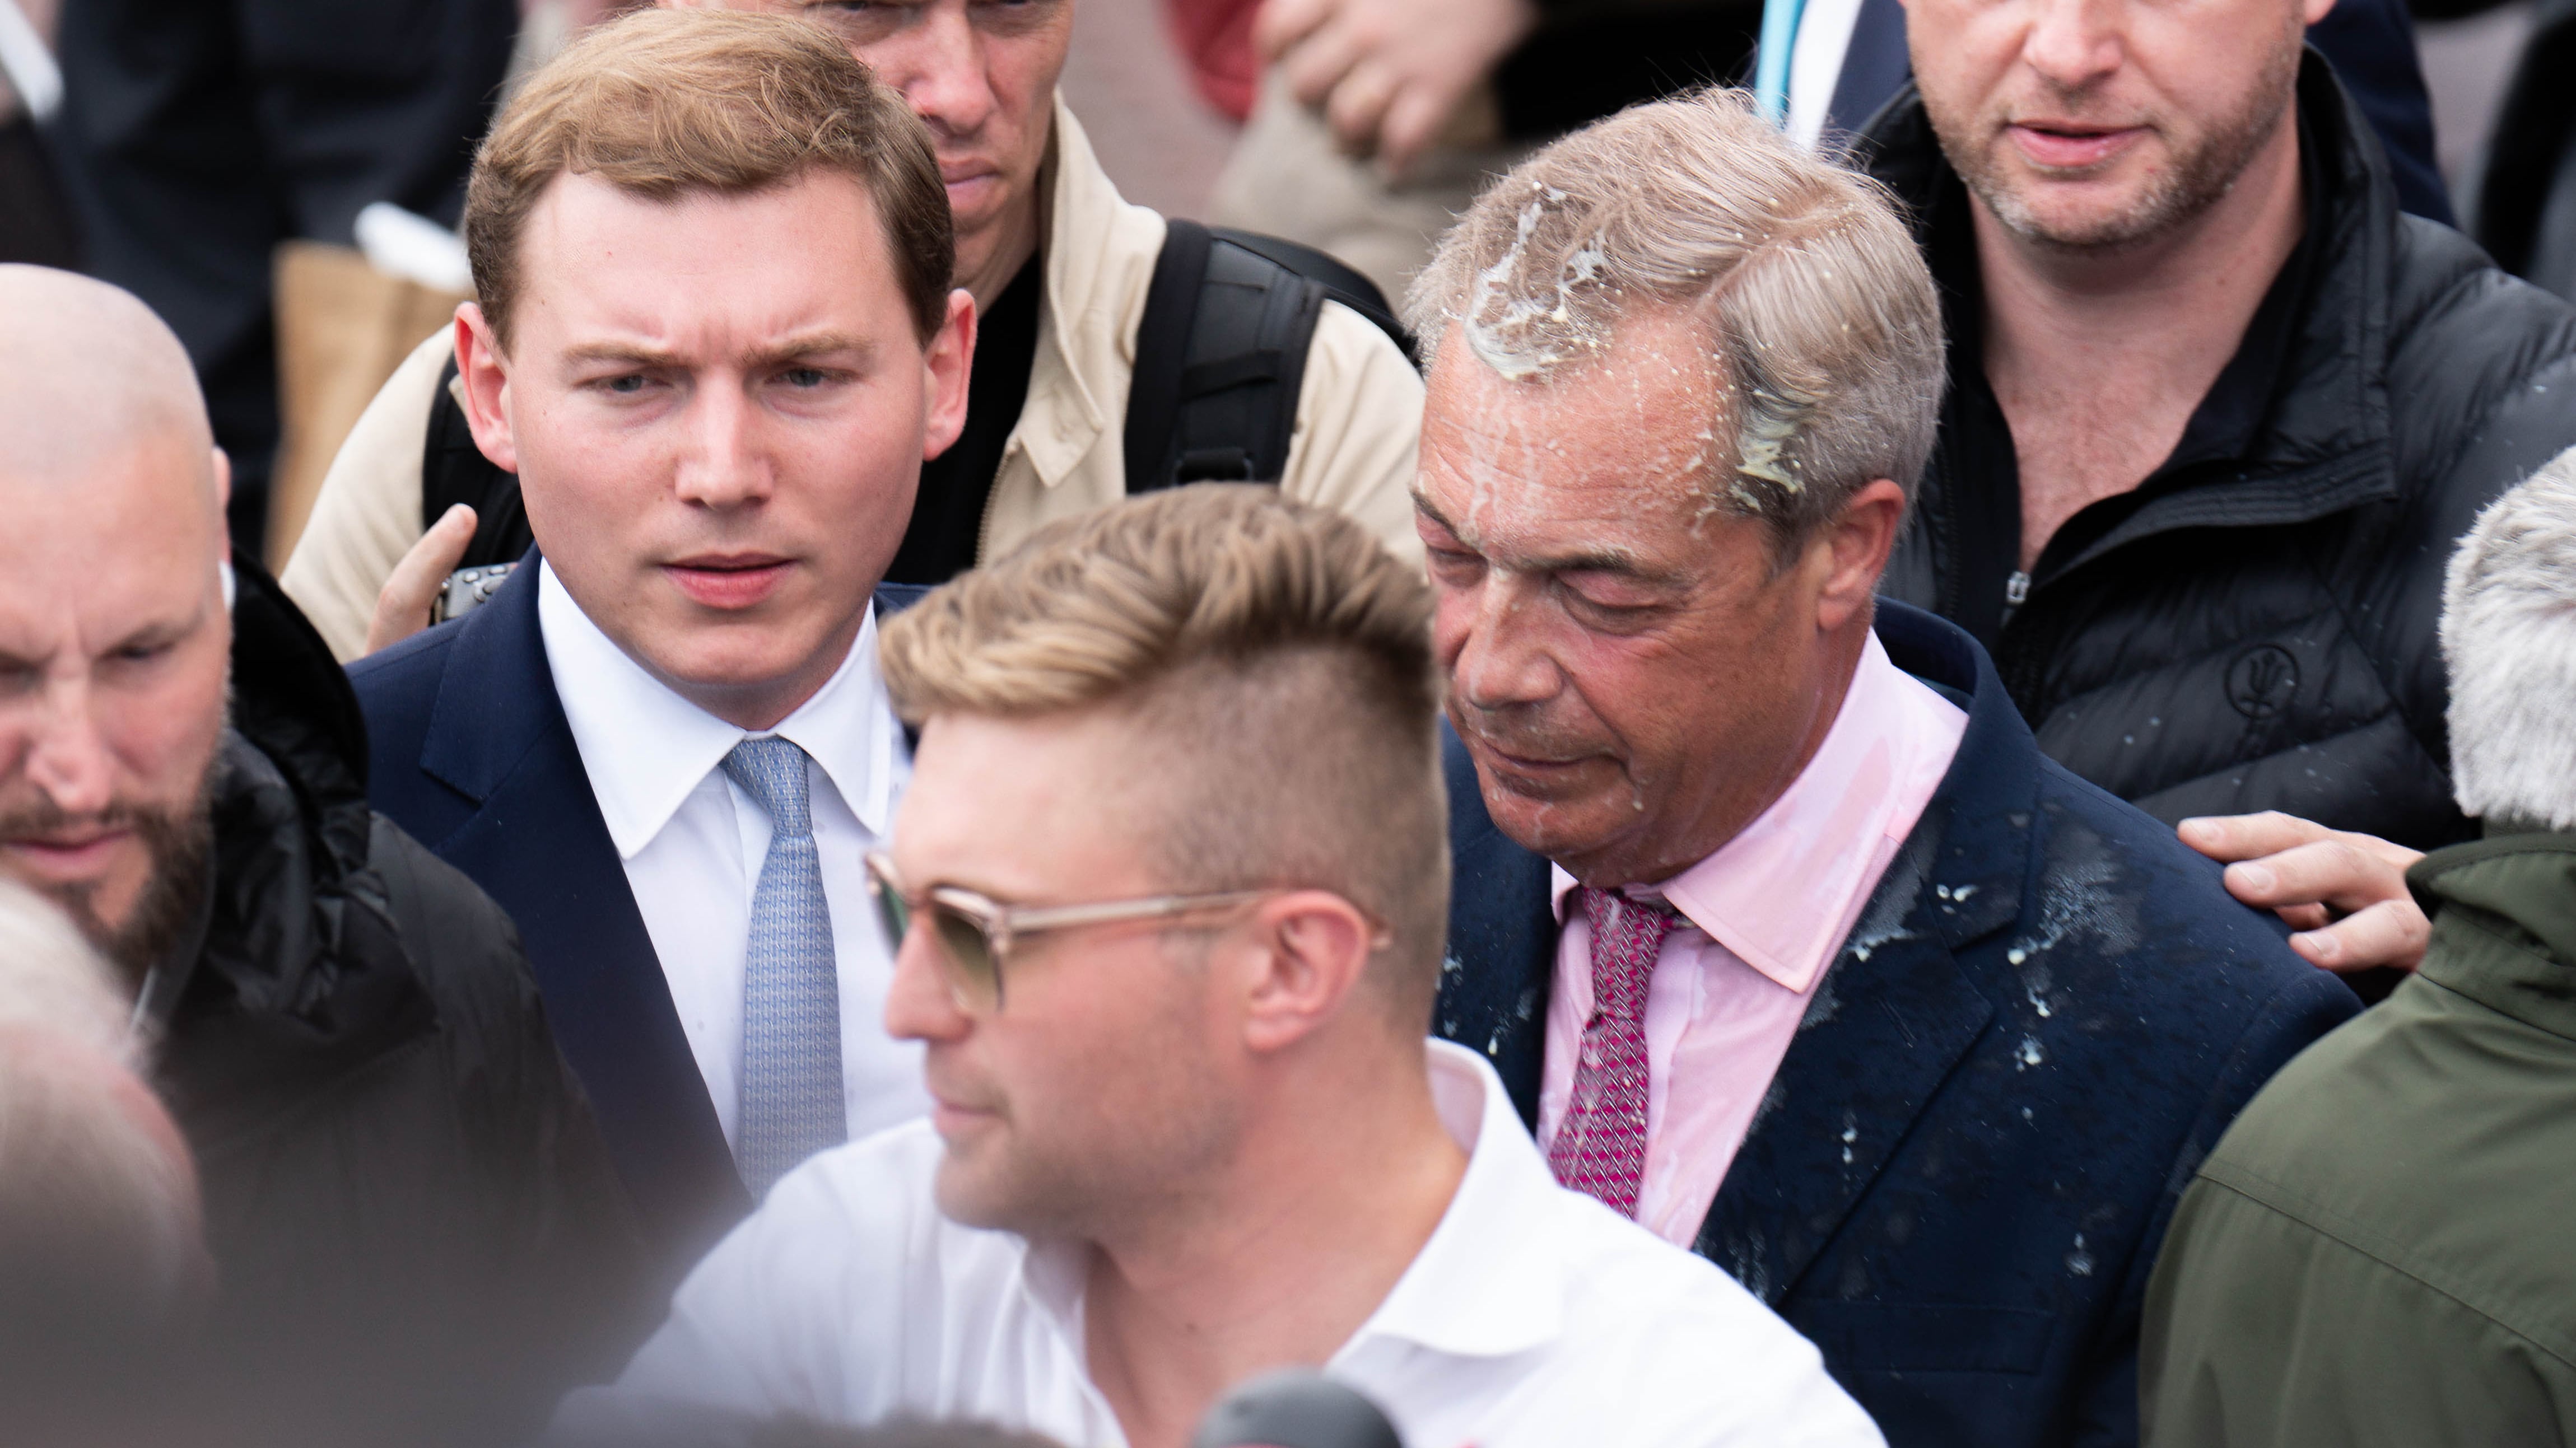 Leader of Reform UK Nigel Farage had a milkshake thrown over him as he left the Moon and Starfish pub after launching his General Election campaign in Clacton-on-Sea, Essex